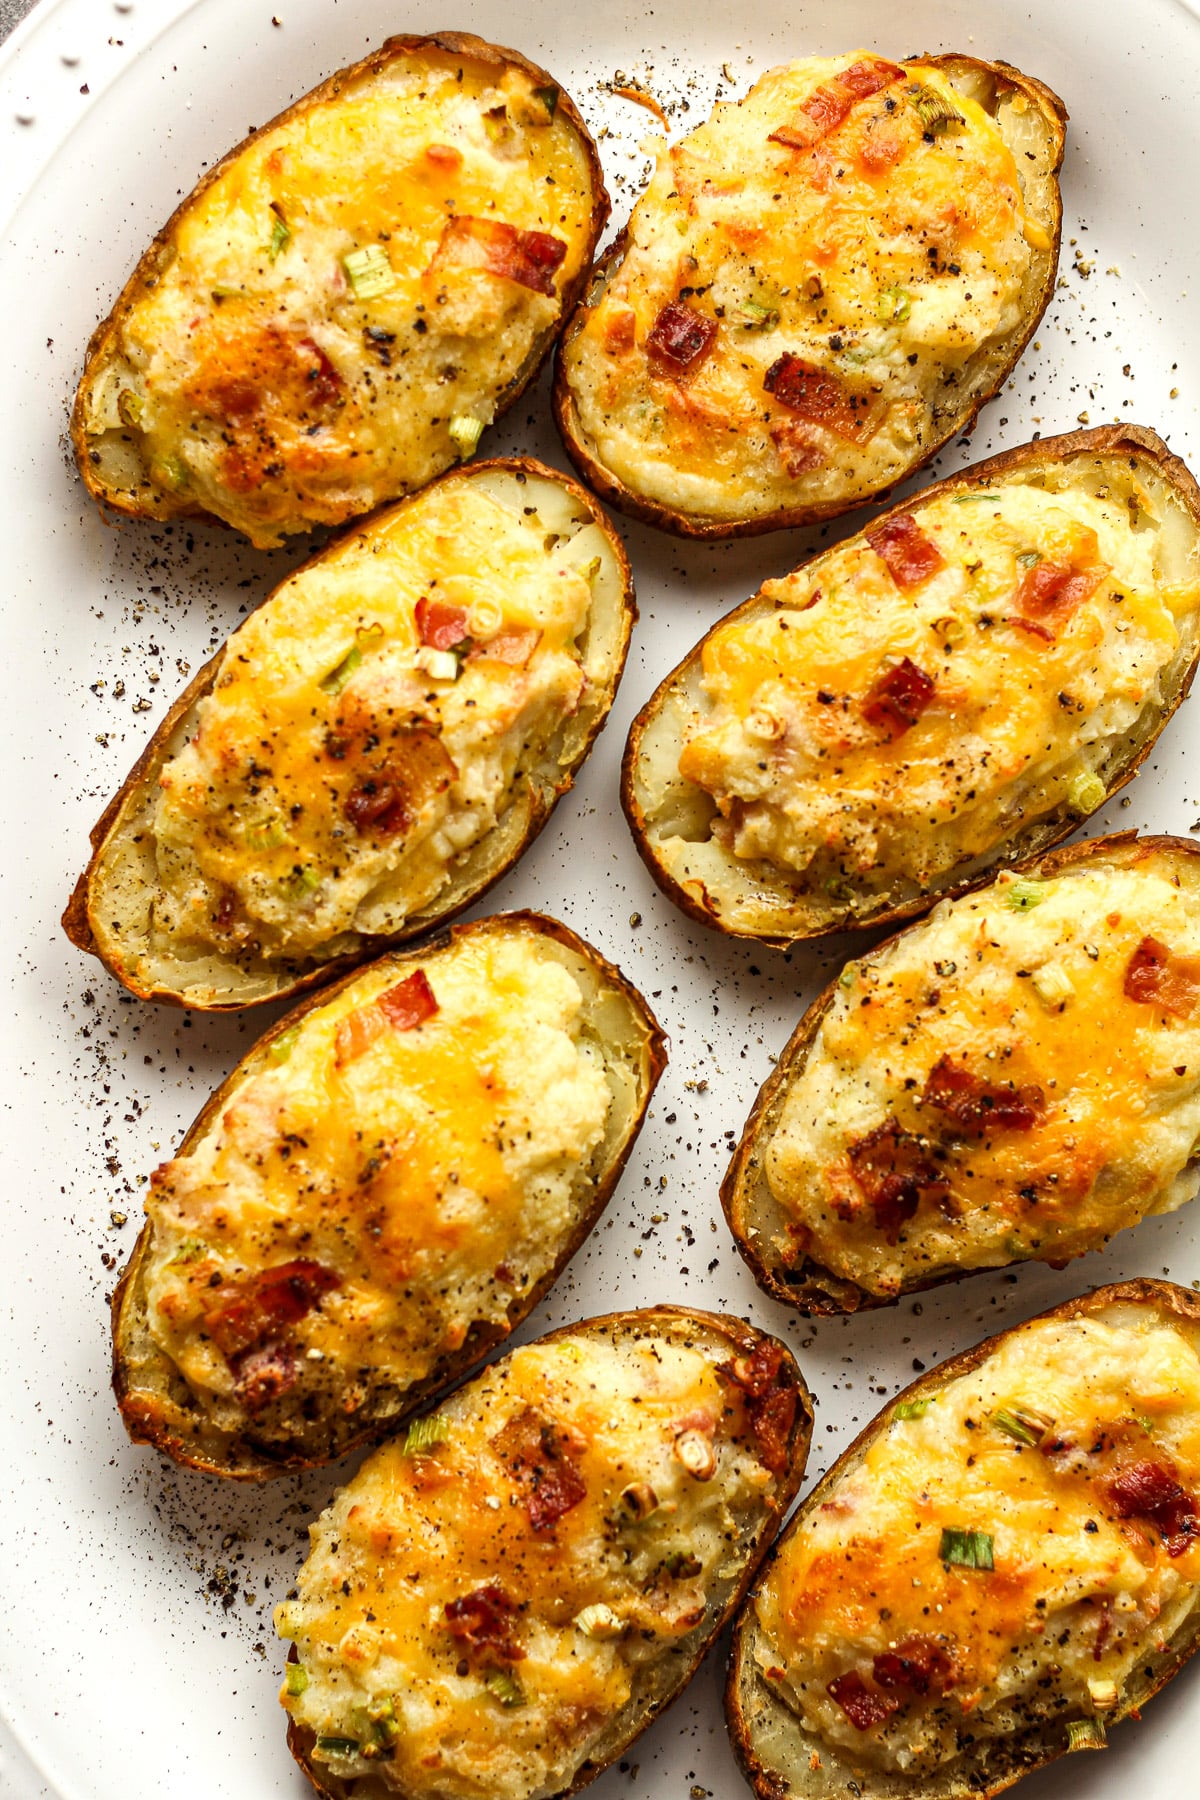 A platter of 8 twice baked potatoes.